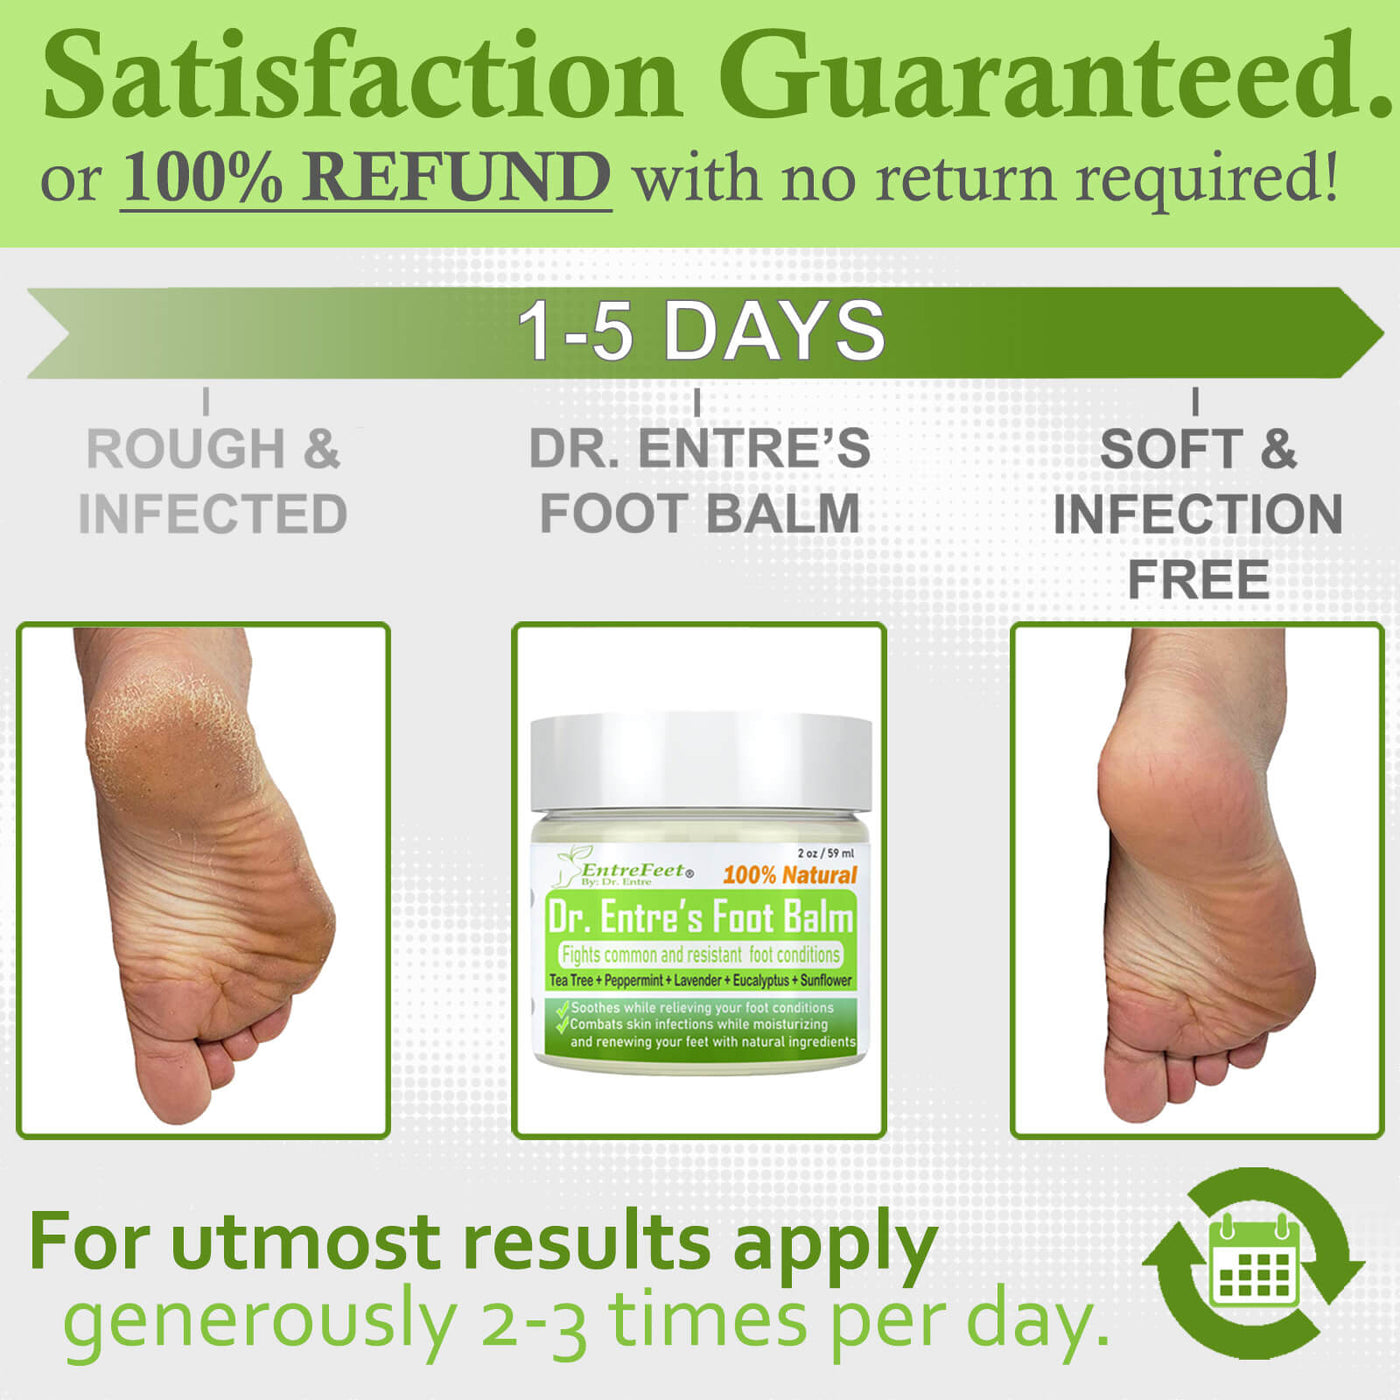 Dr. Entre's Organic Foot Balm, Tea Tree Oil & Shea Butter Based Treatment Cream for Athletes Foot, Dry Feet, Cracked Heels, Itching, and Odor